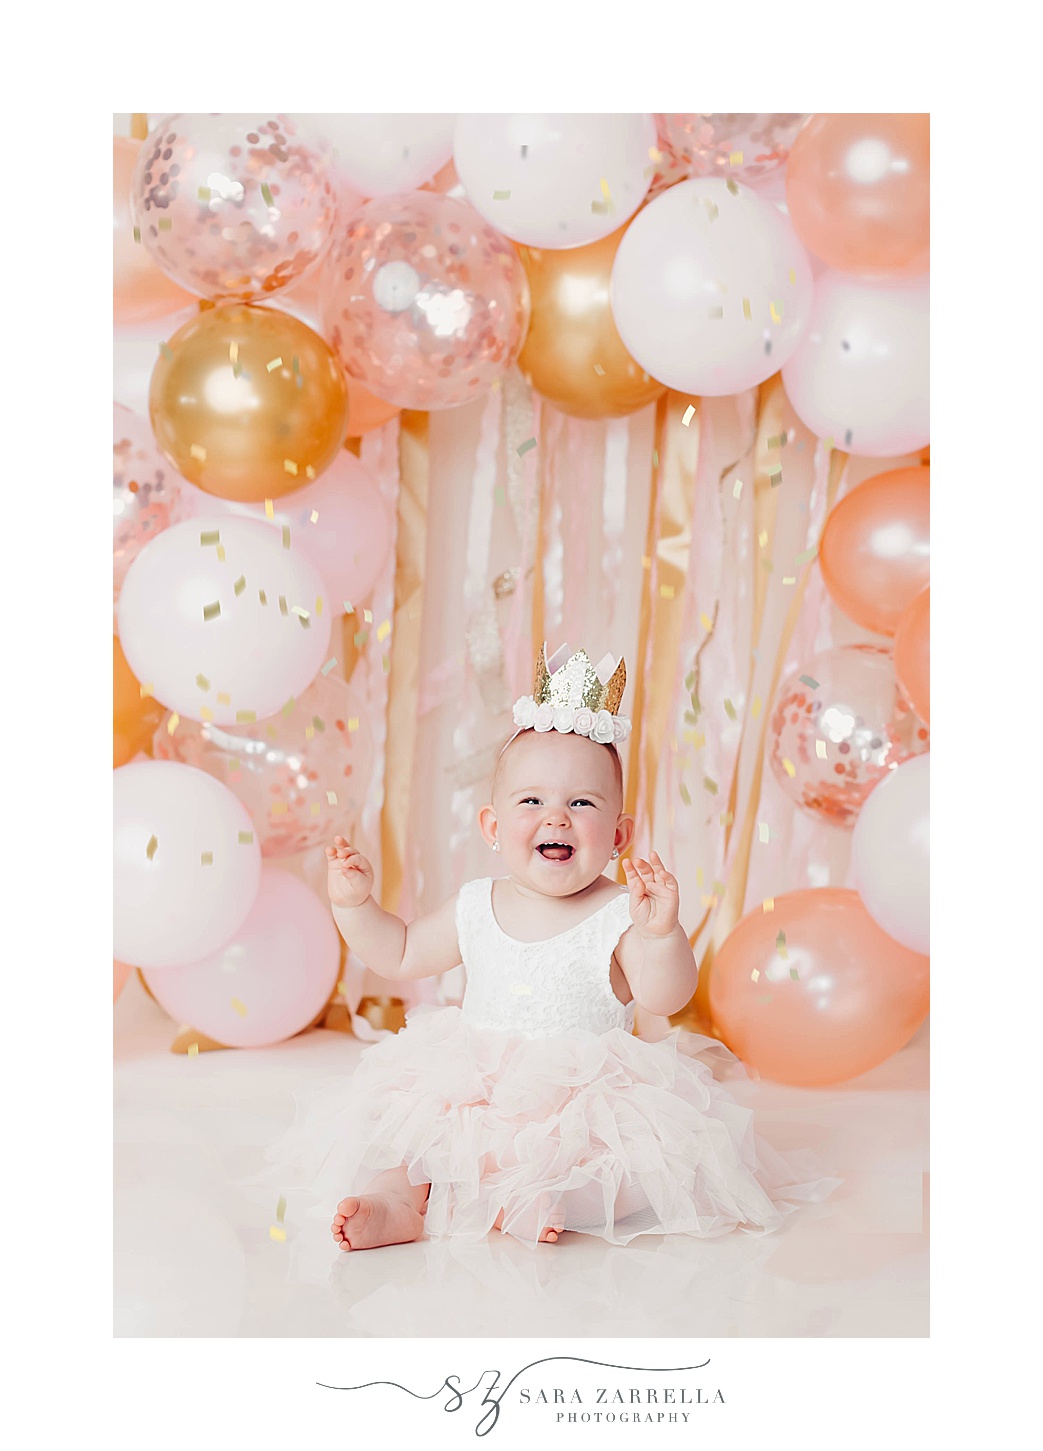 girl laughs in front of pink, orange, and white balloon arch for cake smash portraits with Sara Zarrella Photography